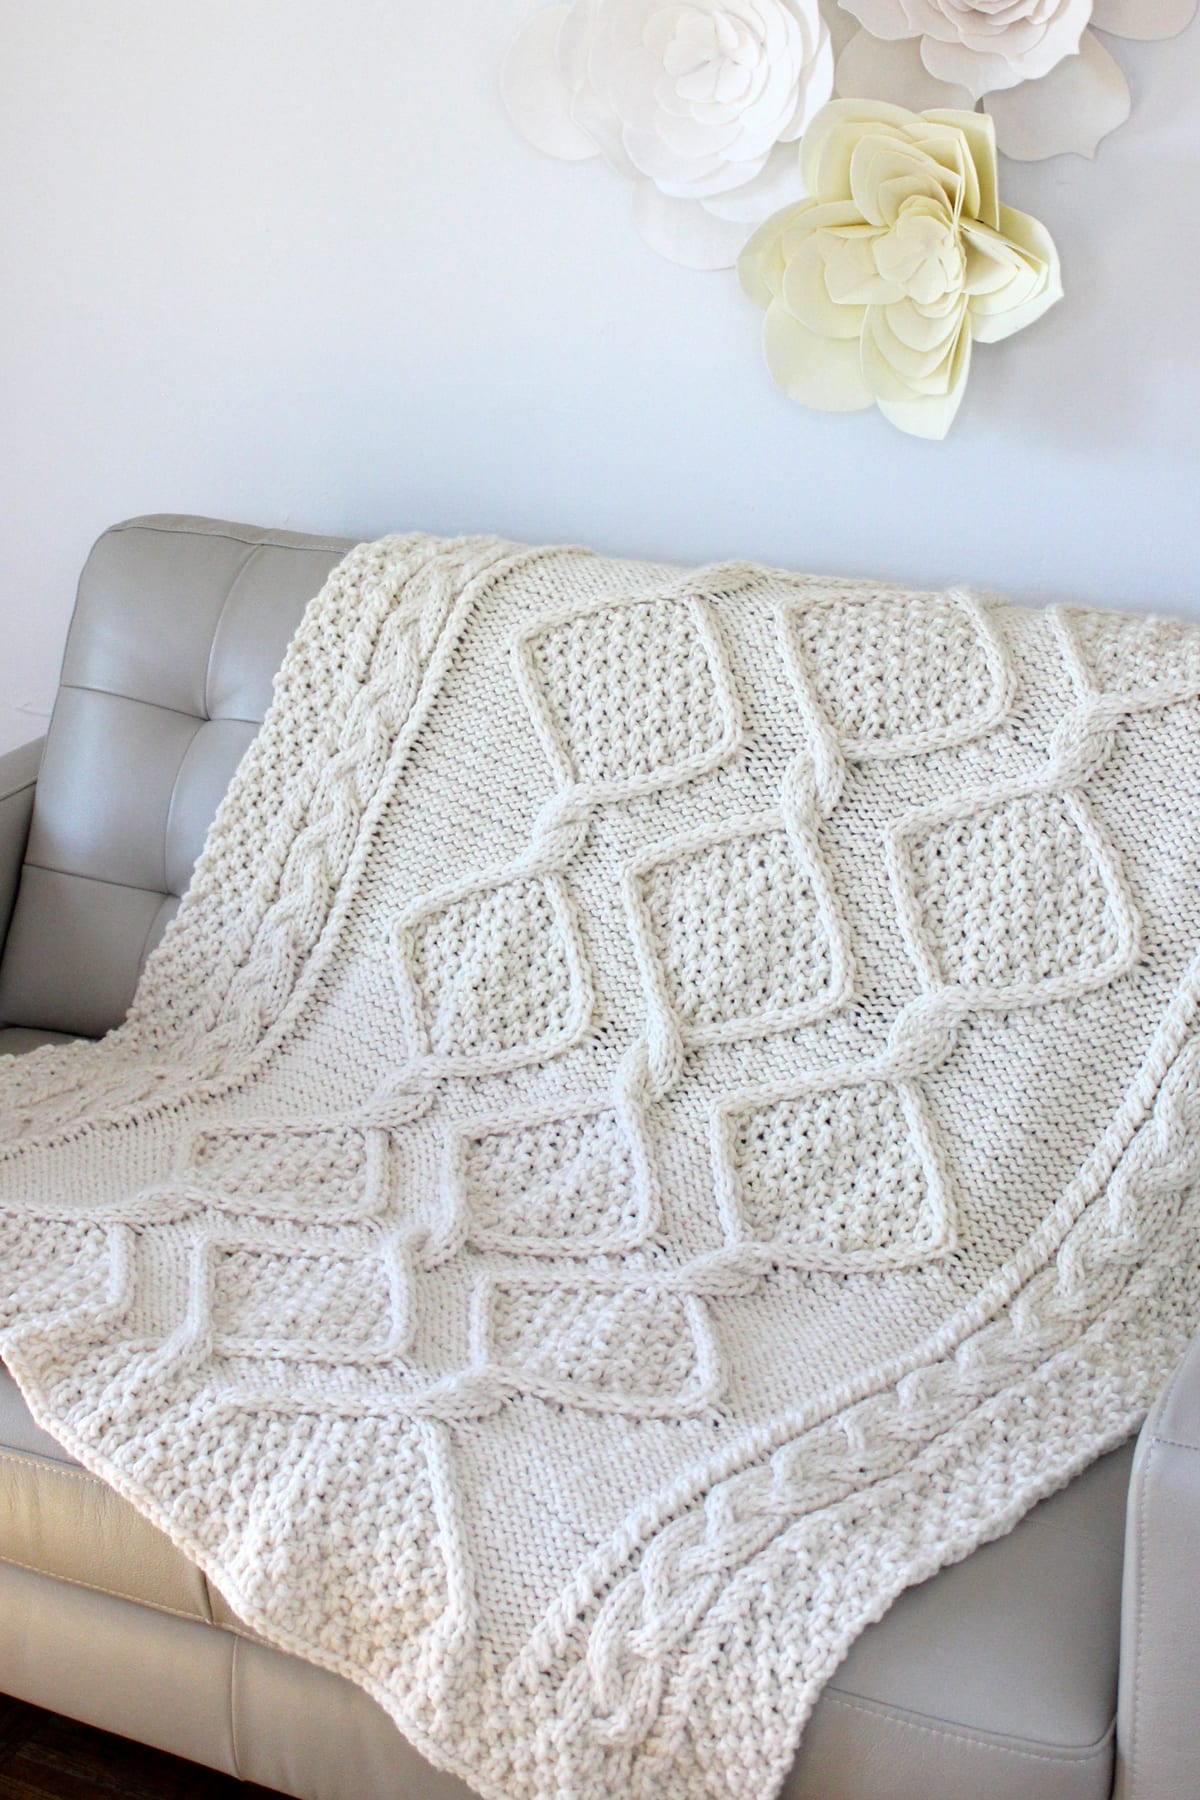 Cable knit blanket draped on a couch in cream colored yarn.